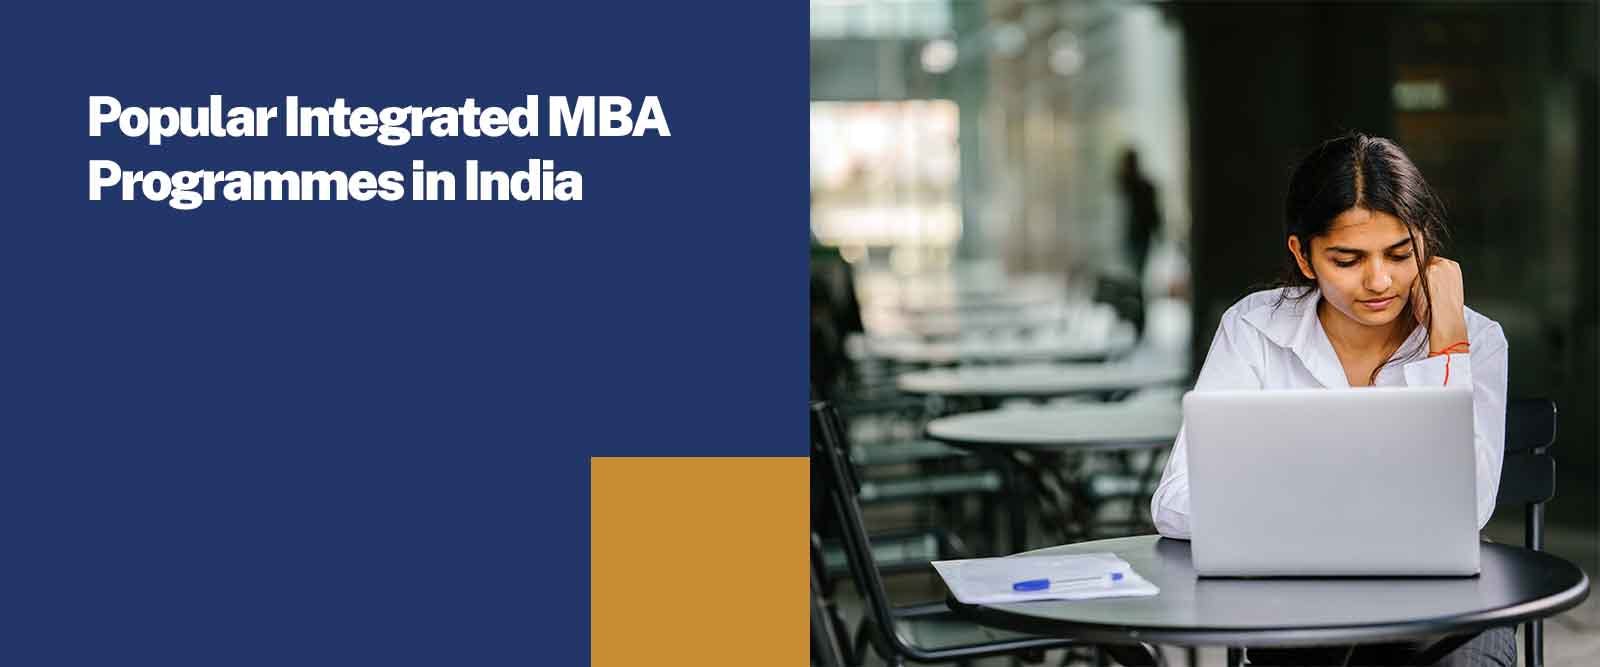 Popular Integrated MBA Programmes in India